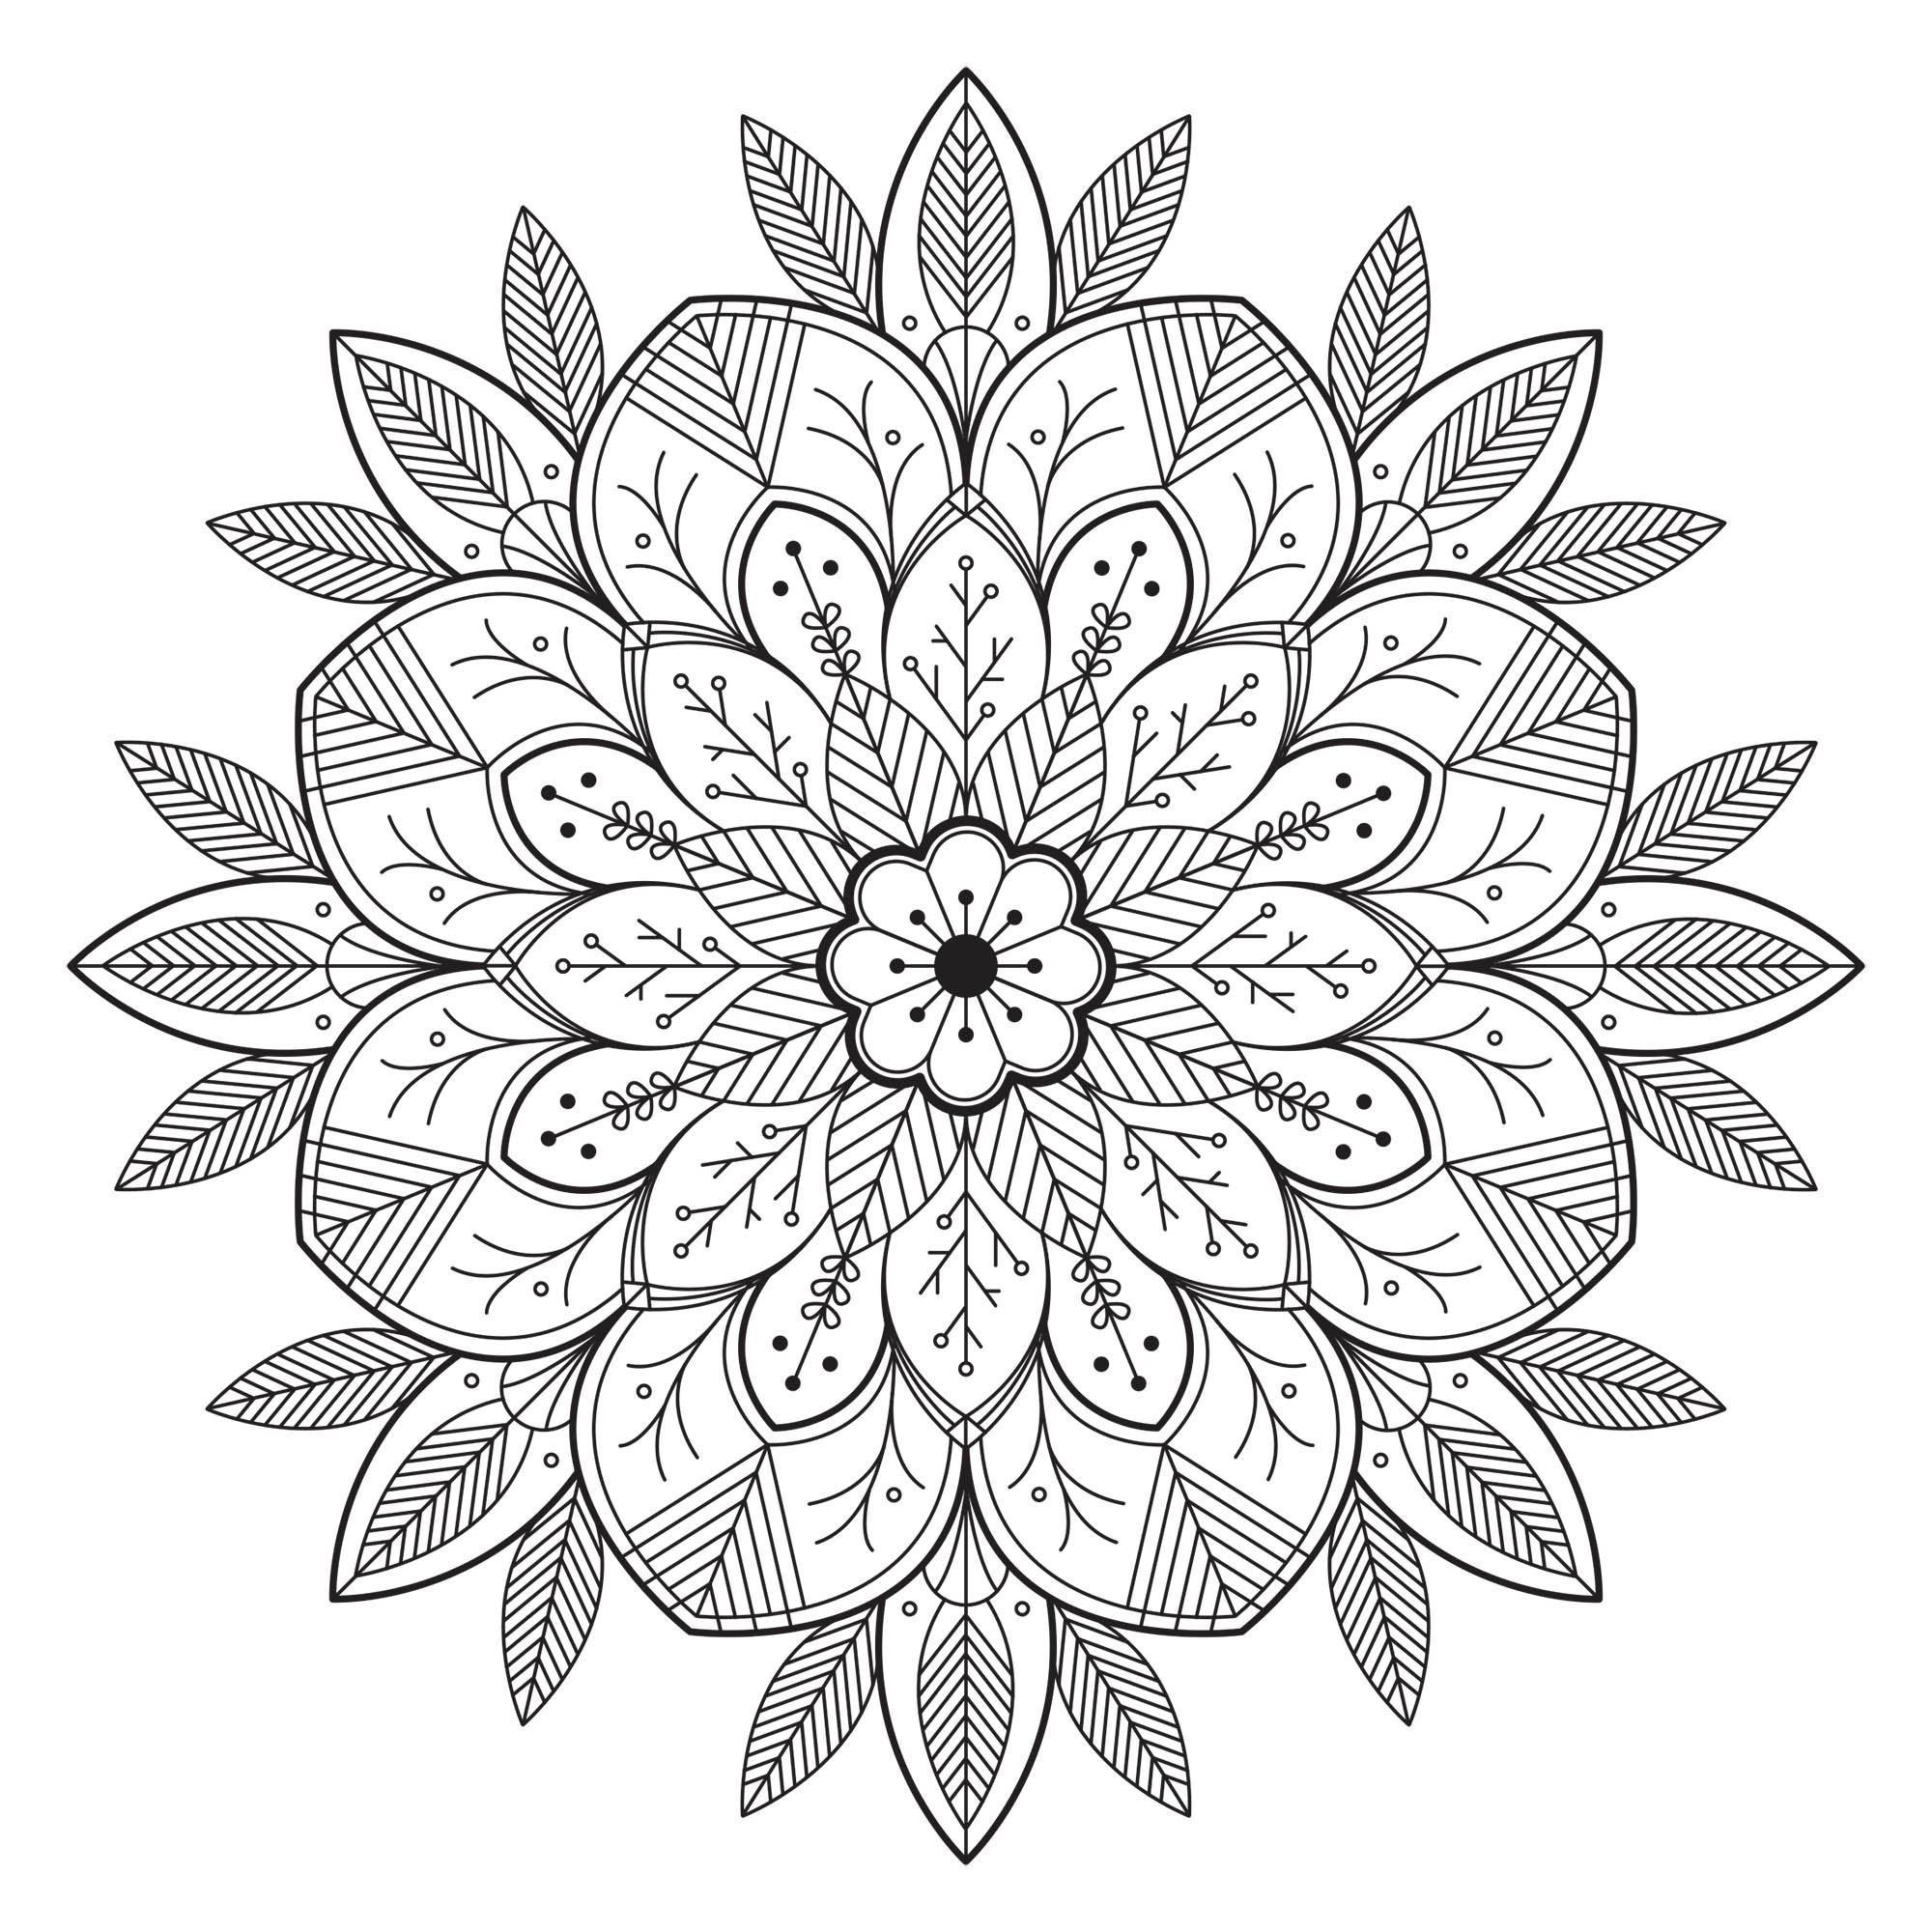 Easy Flower Mandala Coloring Pages Coloring Pages Best